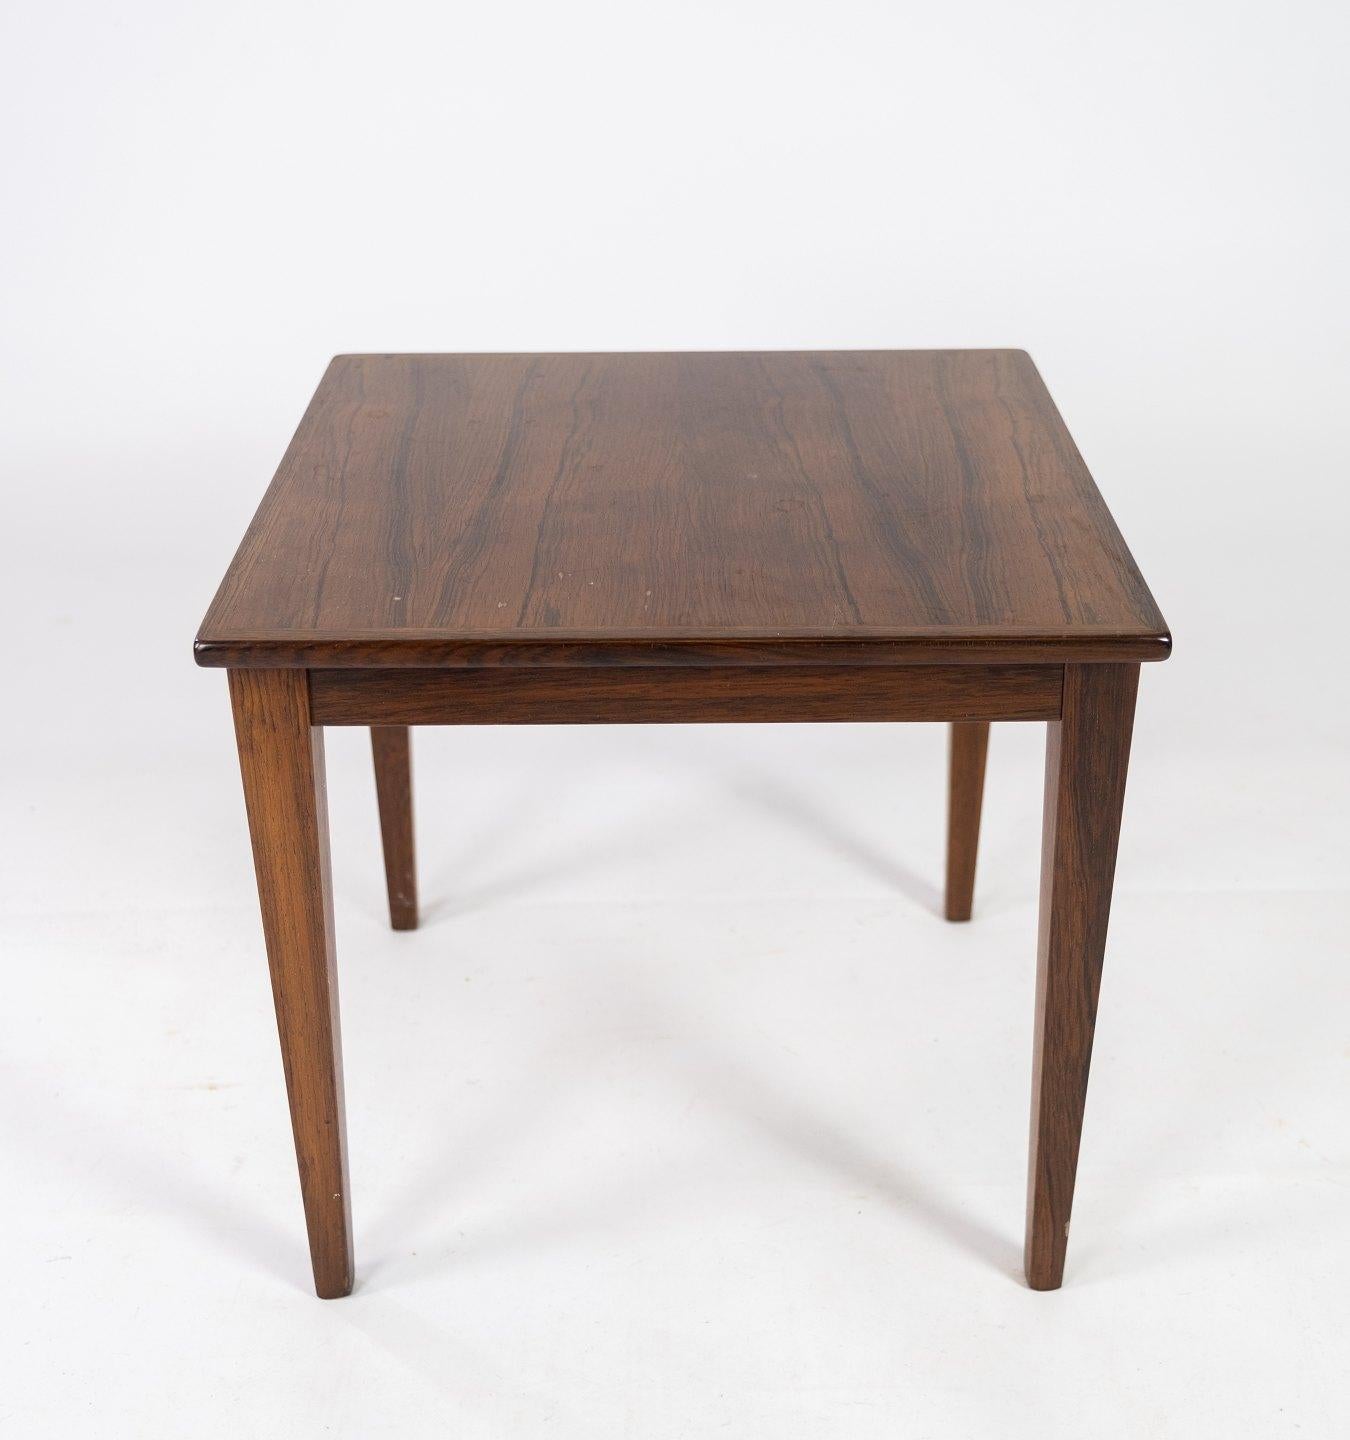 Scandinavian Modern Side Table in Rosewood of Danish Design from the 1960s